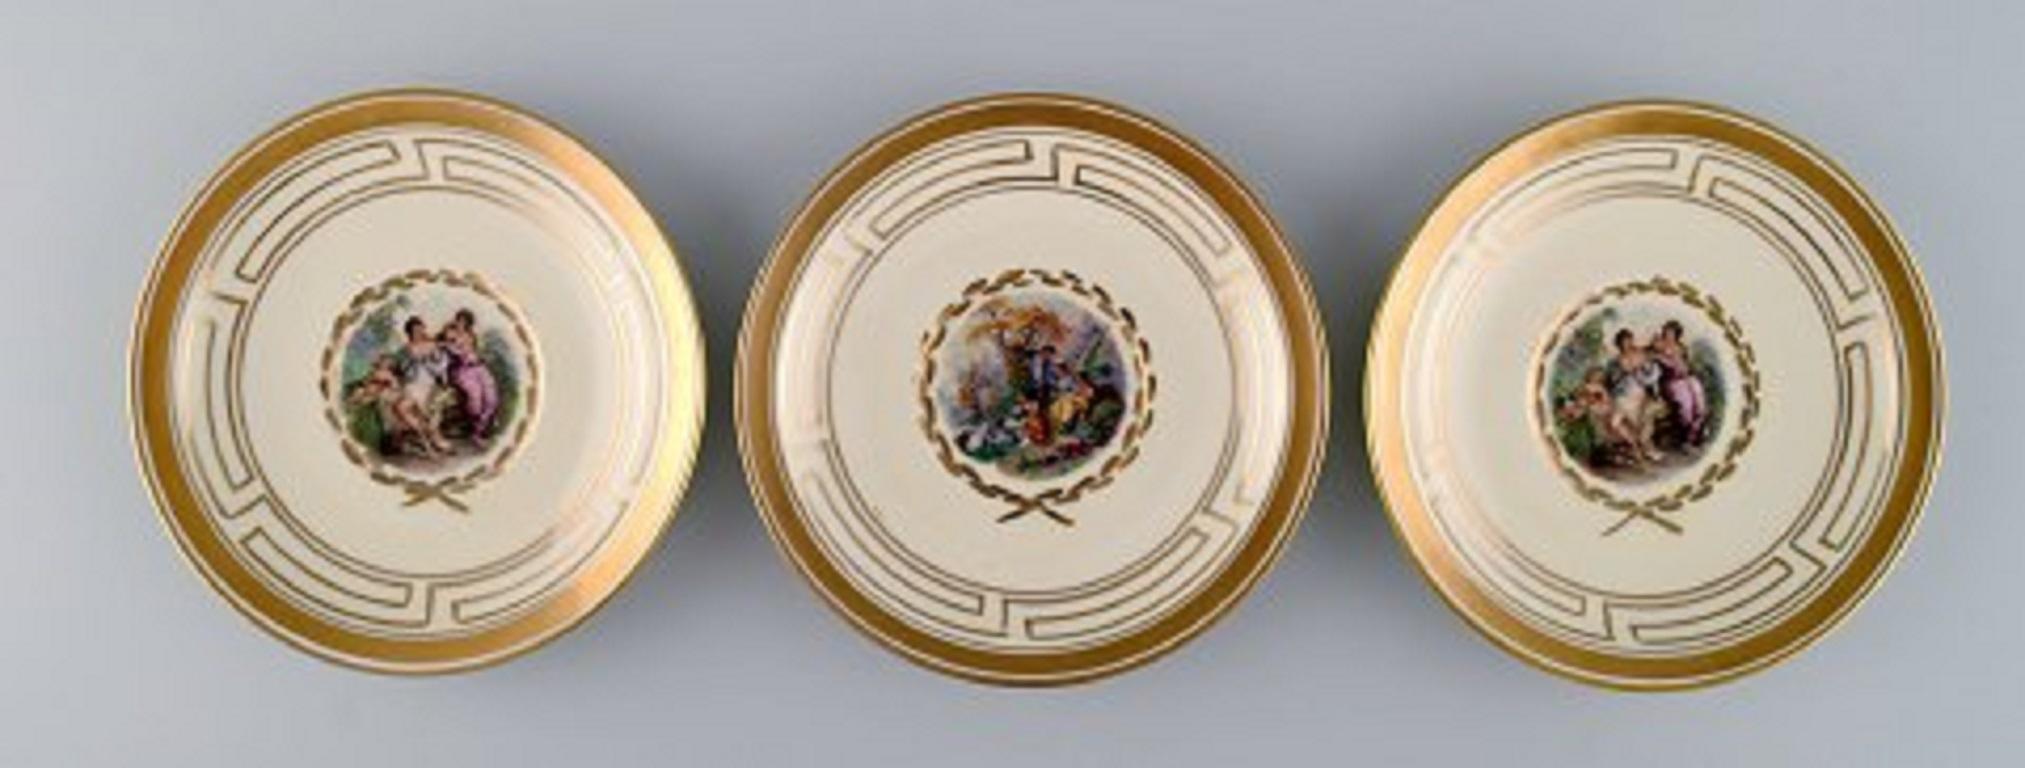 Royal Copenhagen Coffee Service for 10 People in Porcelain with Romantic Scenes 2